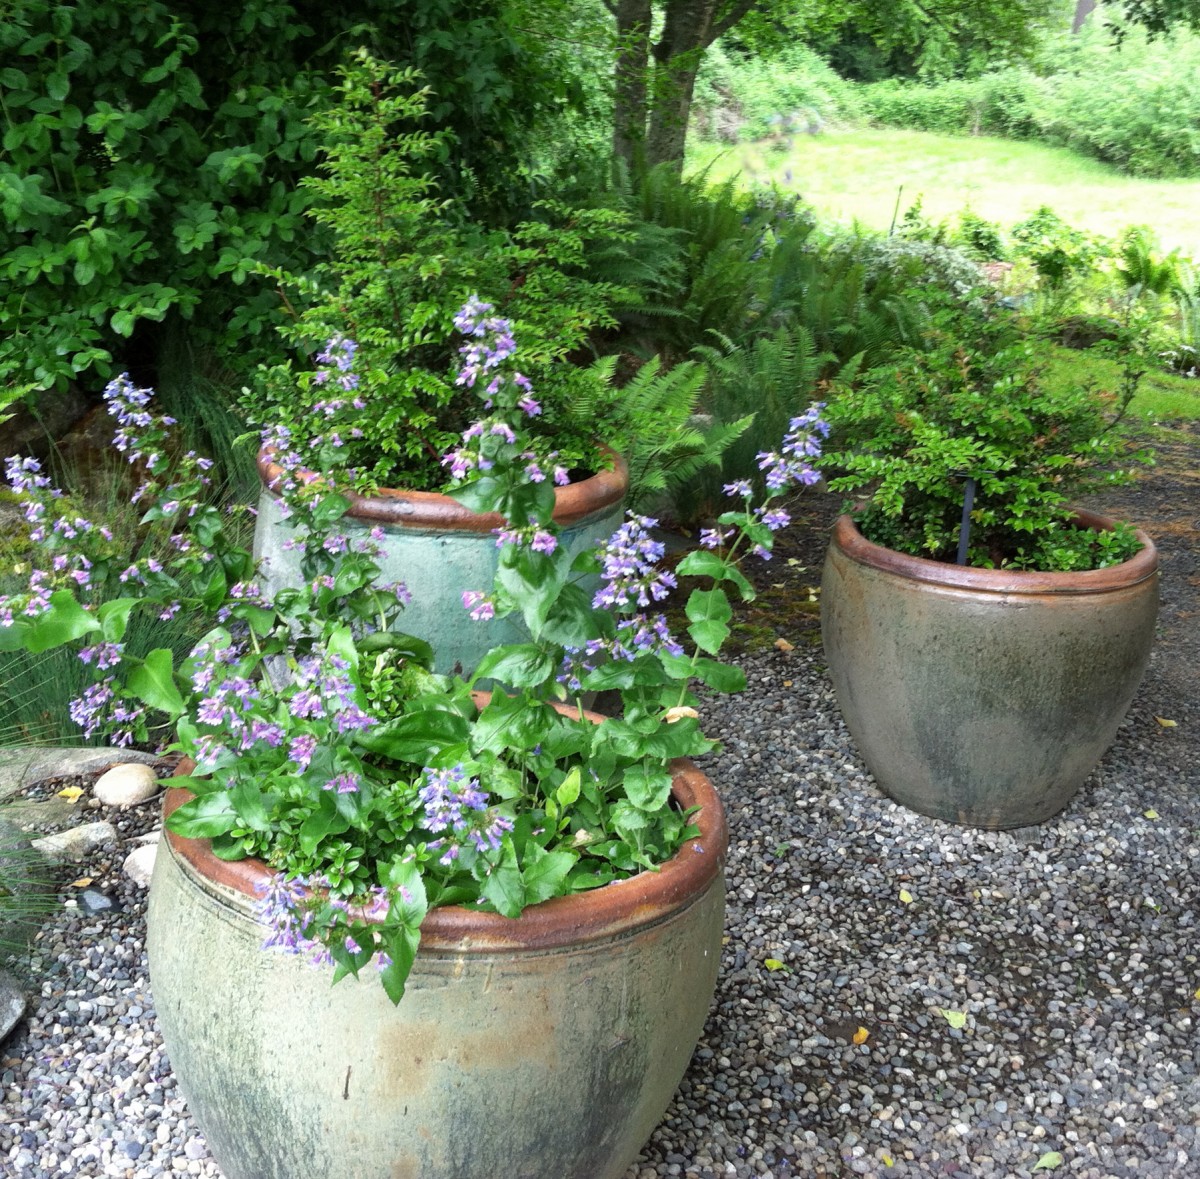 Large pots sitting on a gravel path with plants in summer bloom.